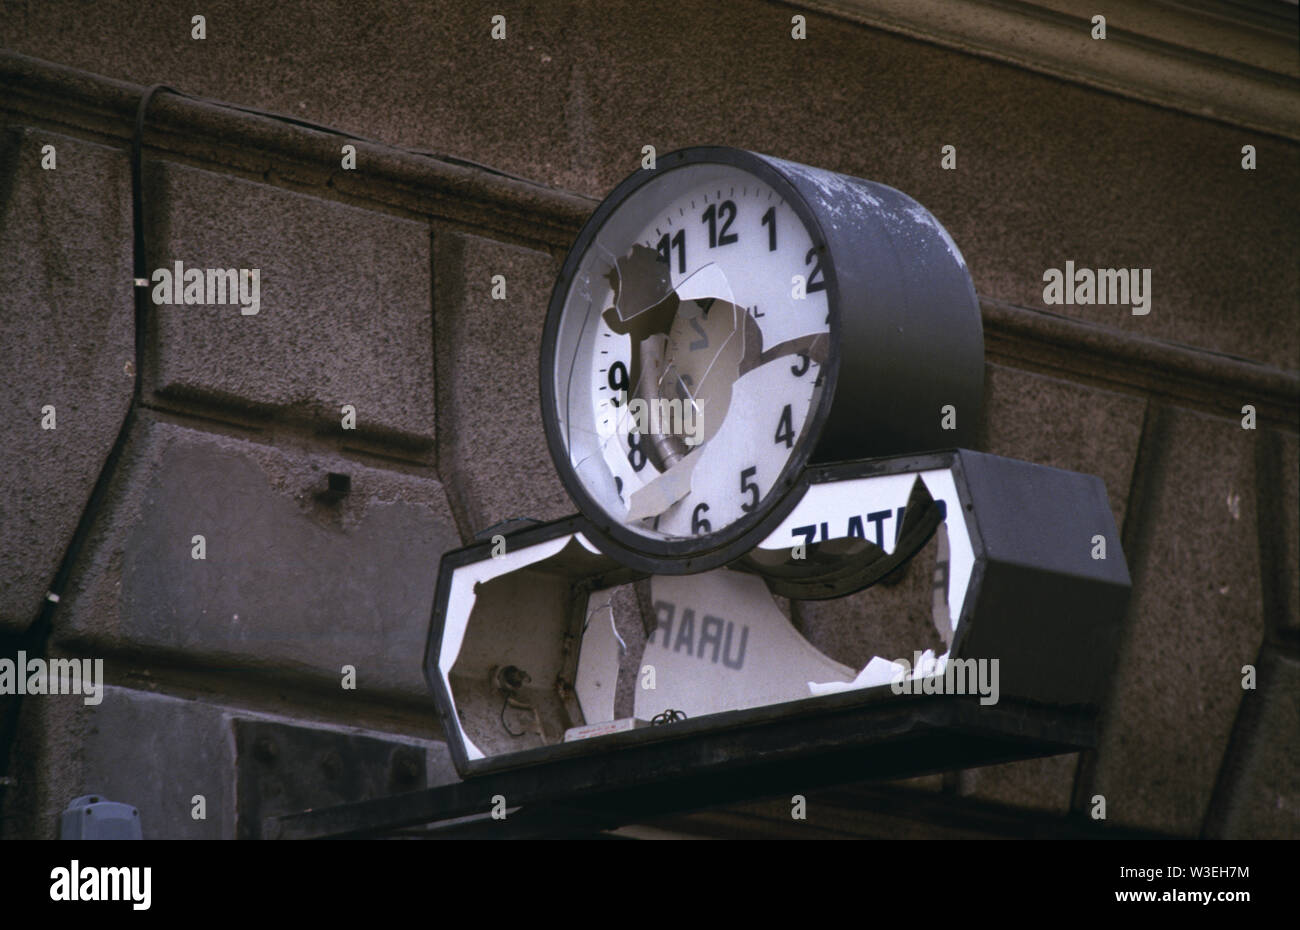 5th April 1993 During the Siege of Sarajevo: a broken clock mounted on a wall bracket in Vase Miskina (today called Ferhadija Street). Stock Photo